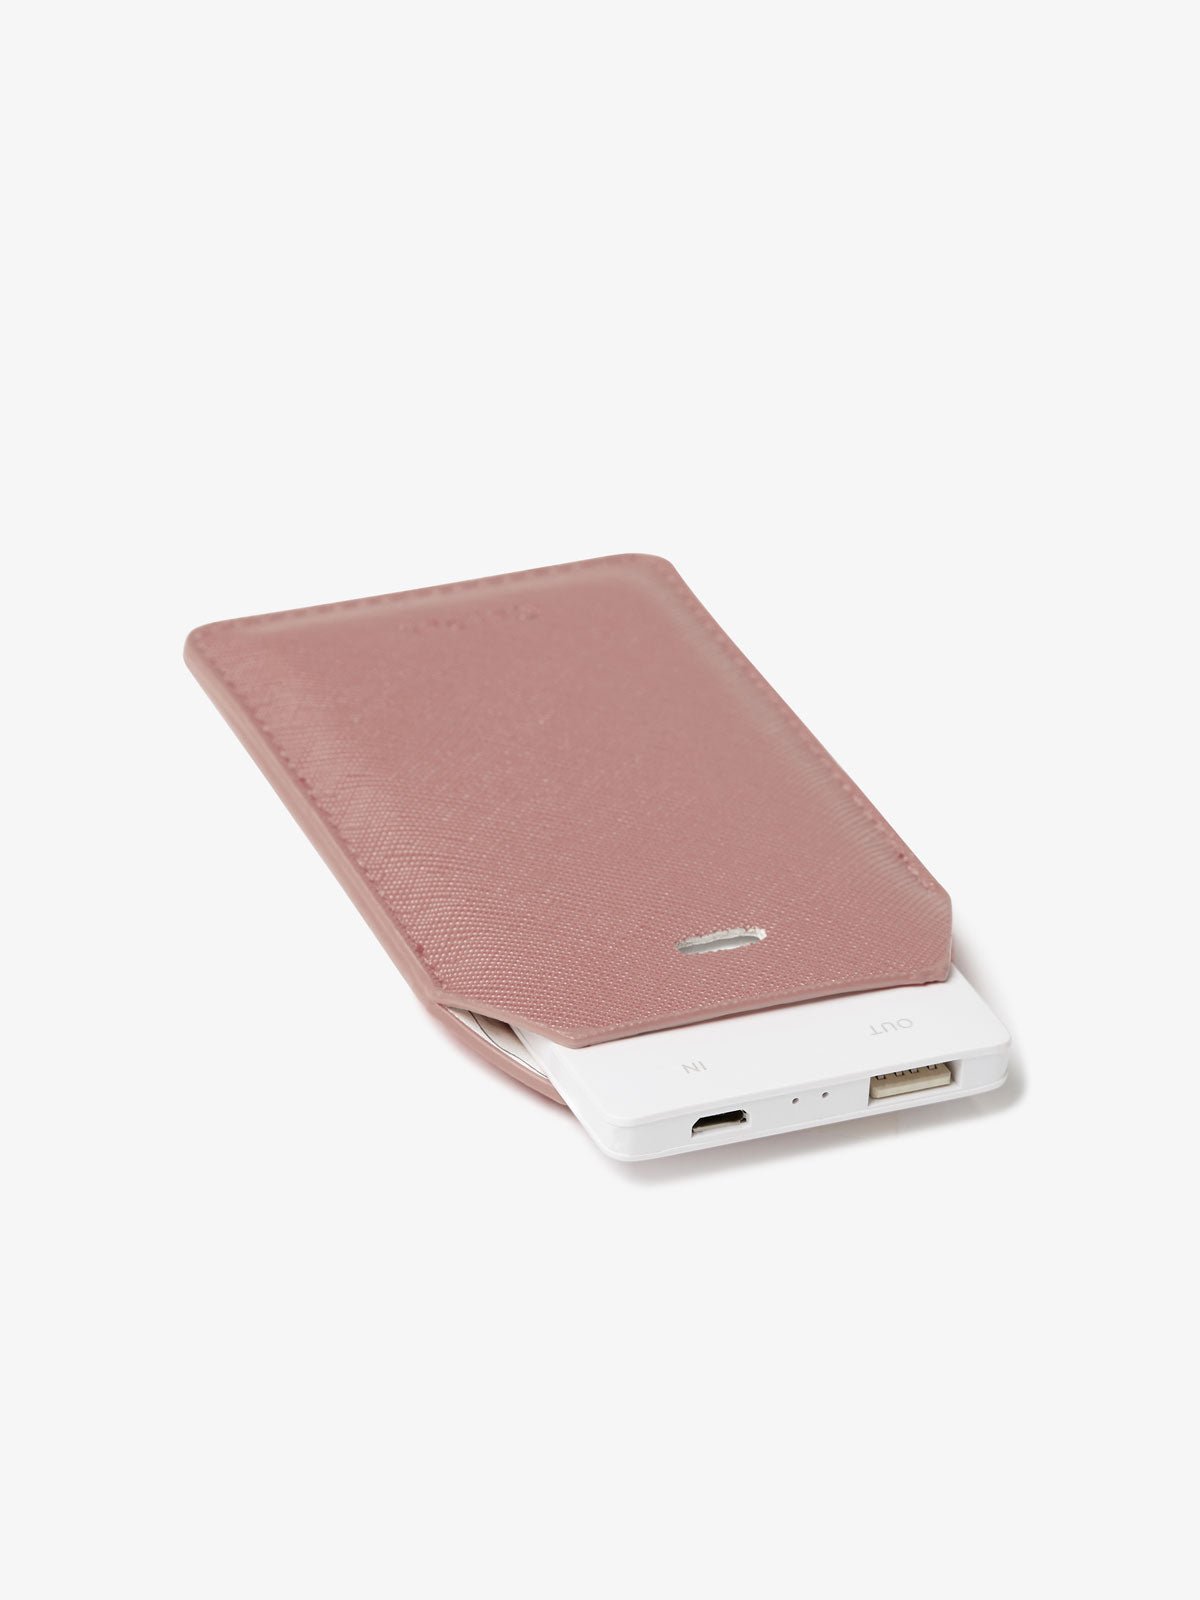 CALPAK luggage tag charger in mauve